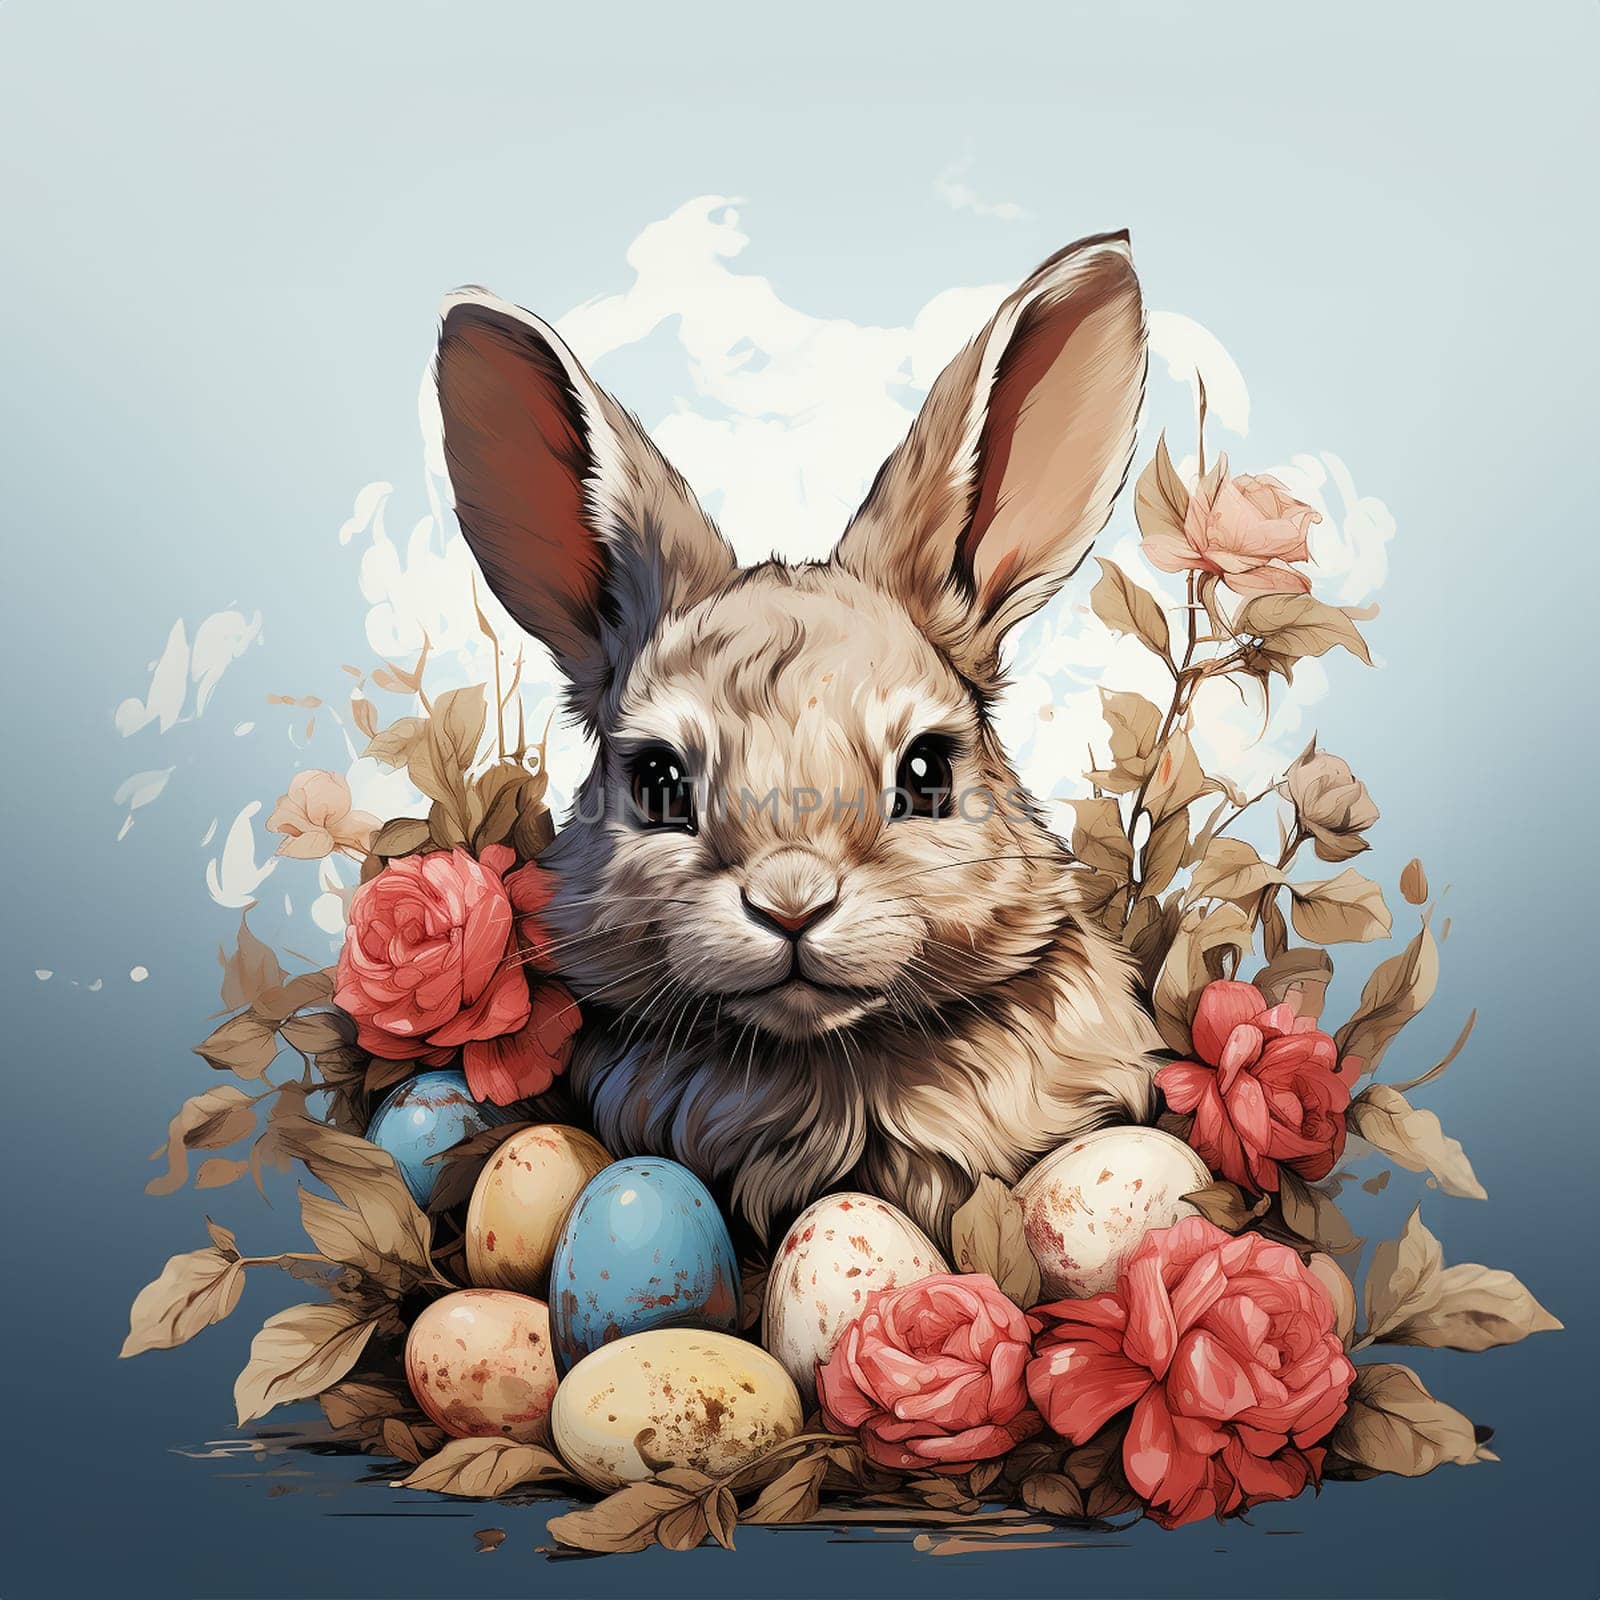 Happy easter! Easter bunny colorful spring flowers. cute classic illustrations of easter eggs in a field of flowers with Easter bunny, nest, bunnies and a festive frame with greeting text for a greeting card, poster or background Copy space